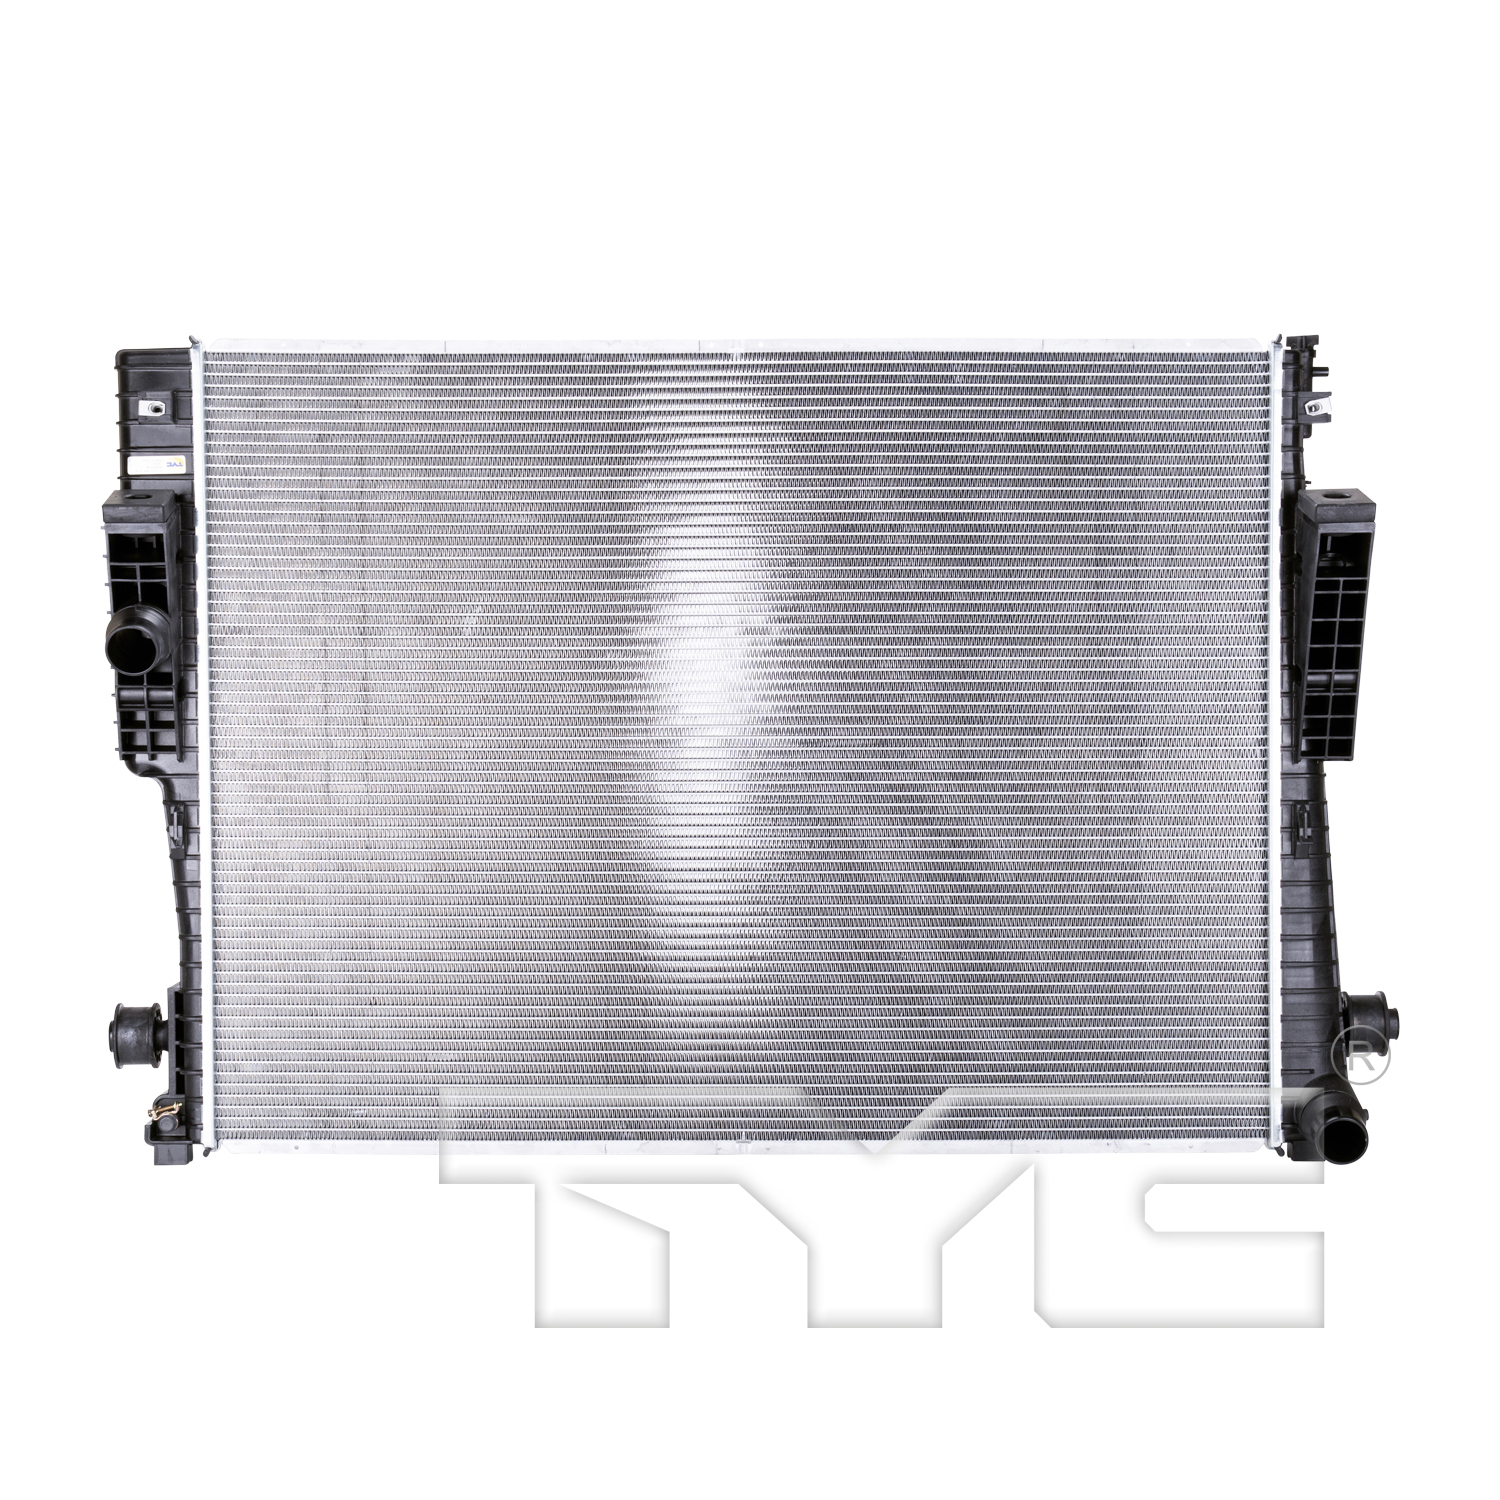 Aftermarket RADIATORS for FORD - F-250 SUPER DUTY, F-250 SUPER DUTY,08-10,Radiator assembly